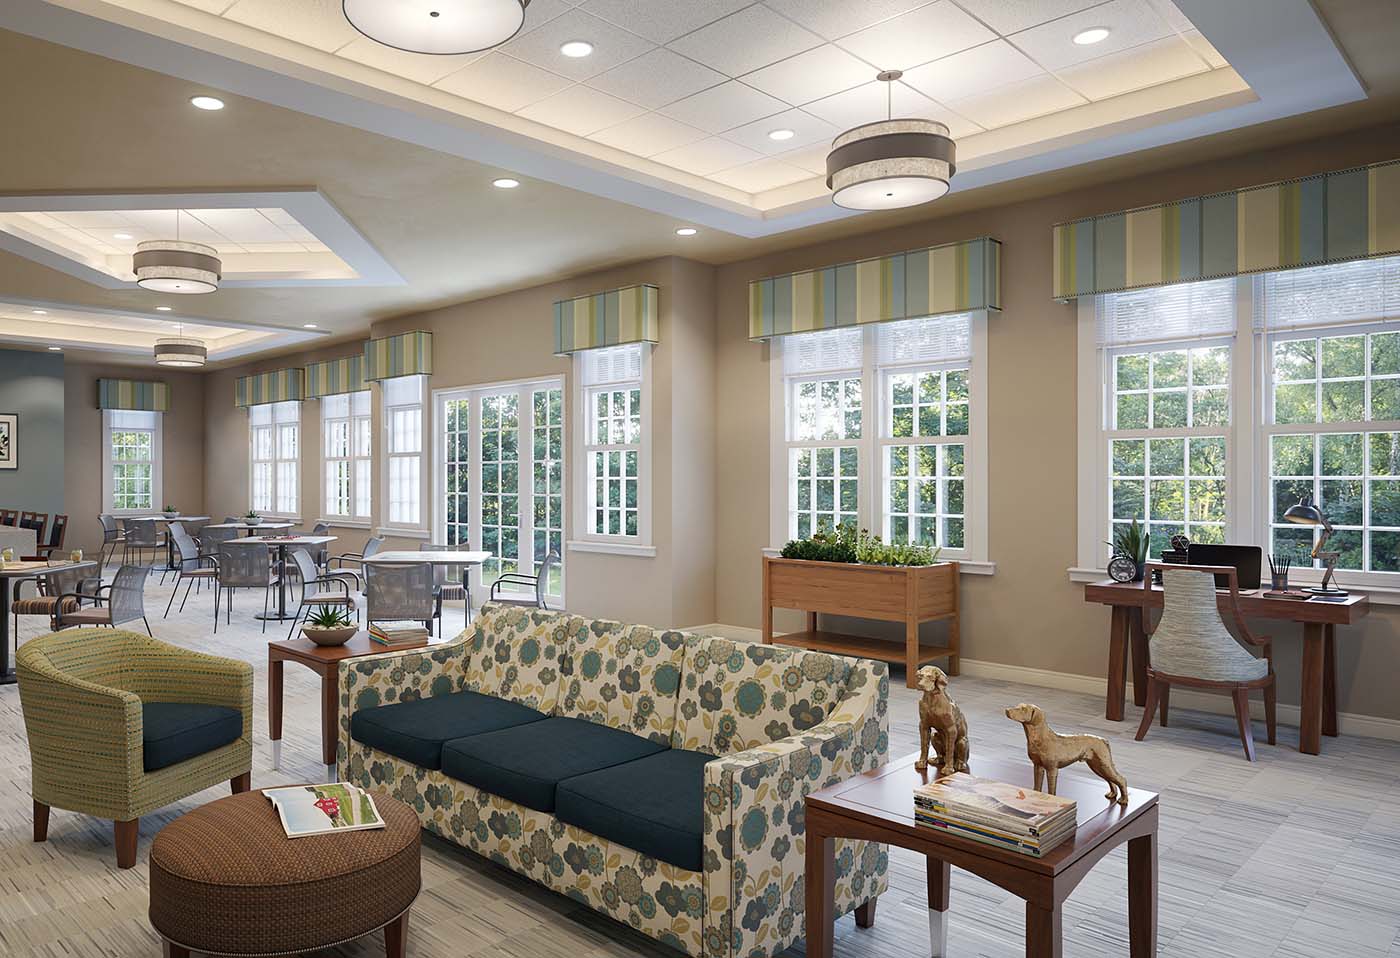 View of a row of windows illuminating a shared recreation space at a senior living community